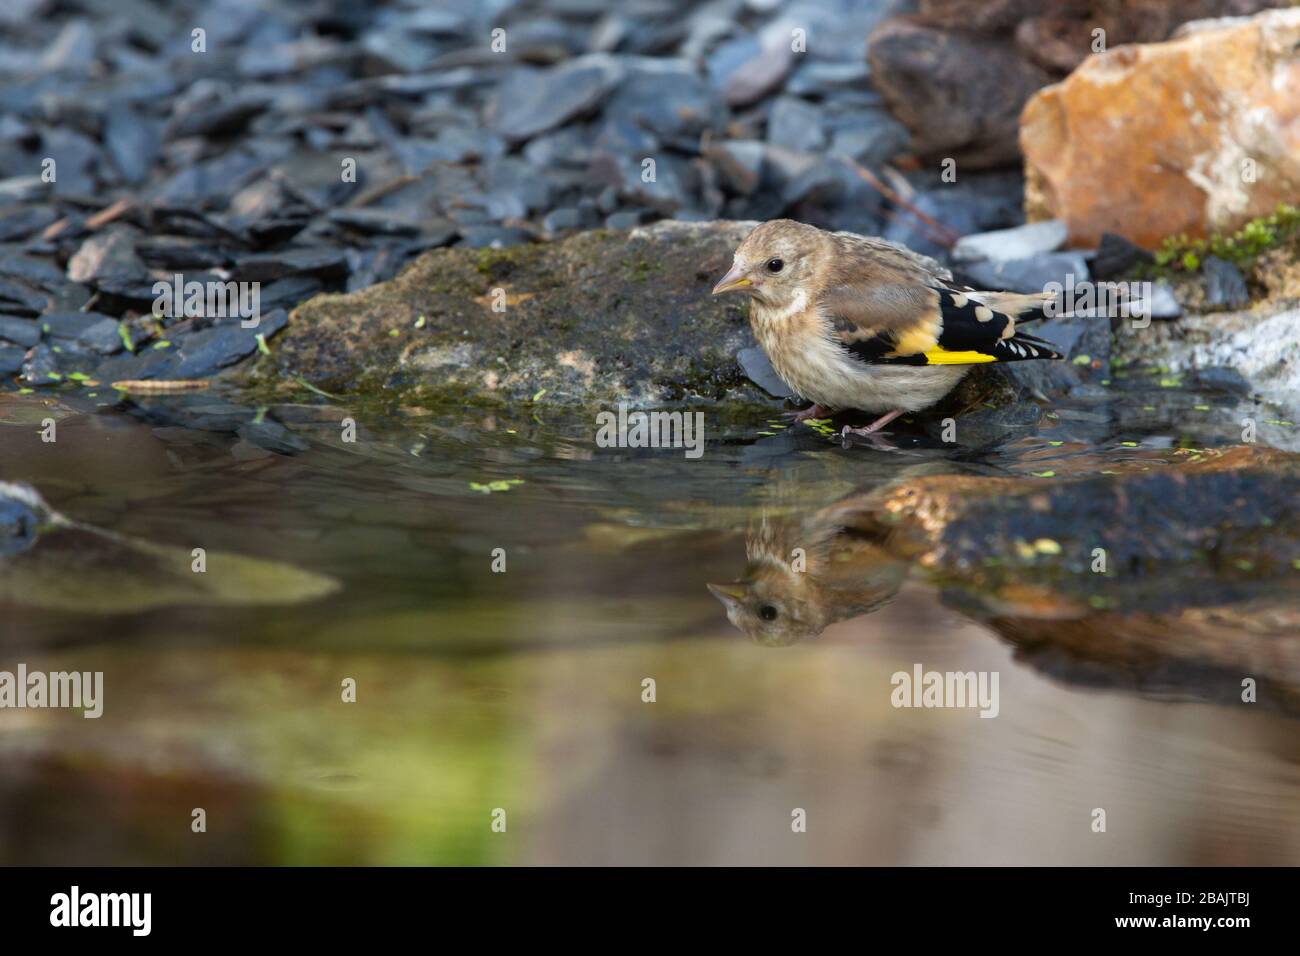 Juvenile Goldfinch [ Carduelis carduelis ] at garden pond with reflection Stock Photo